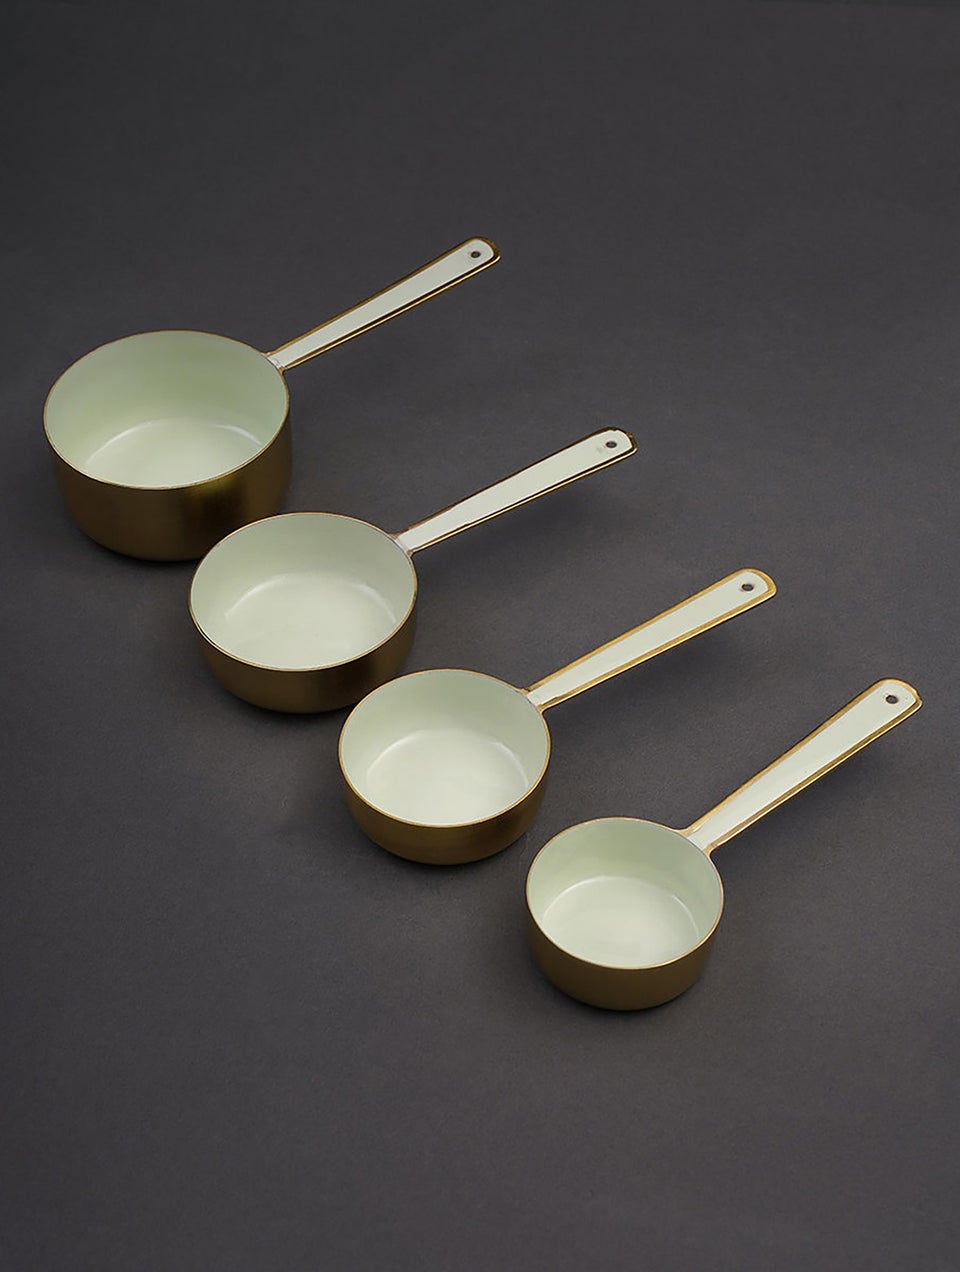 Lime Green And Golden Stainless Steel Measuring Cups